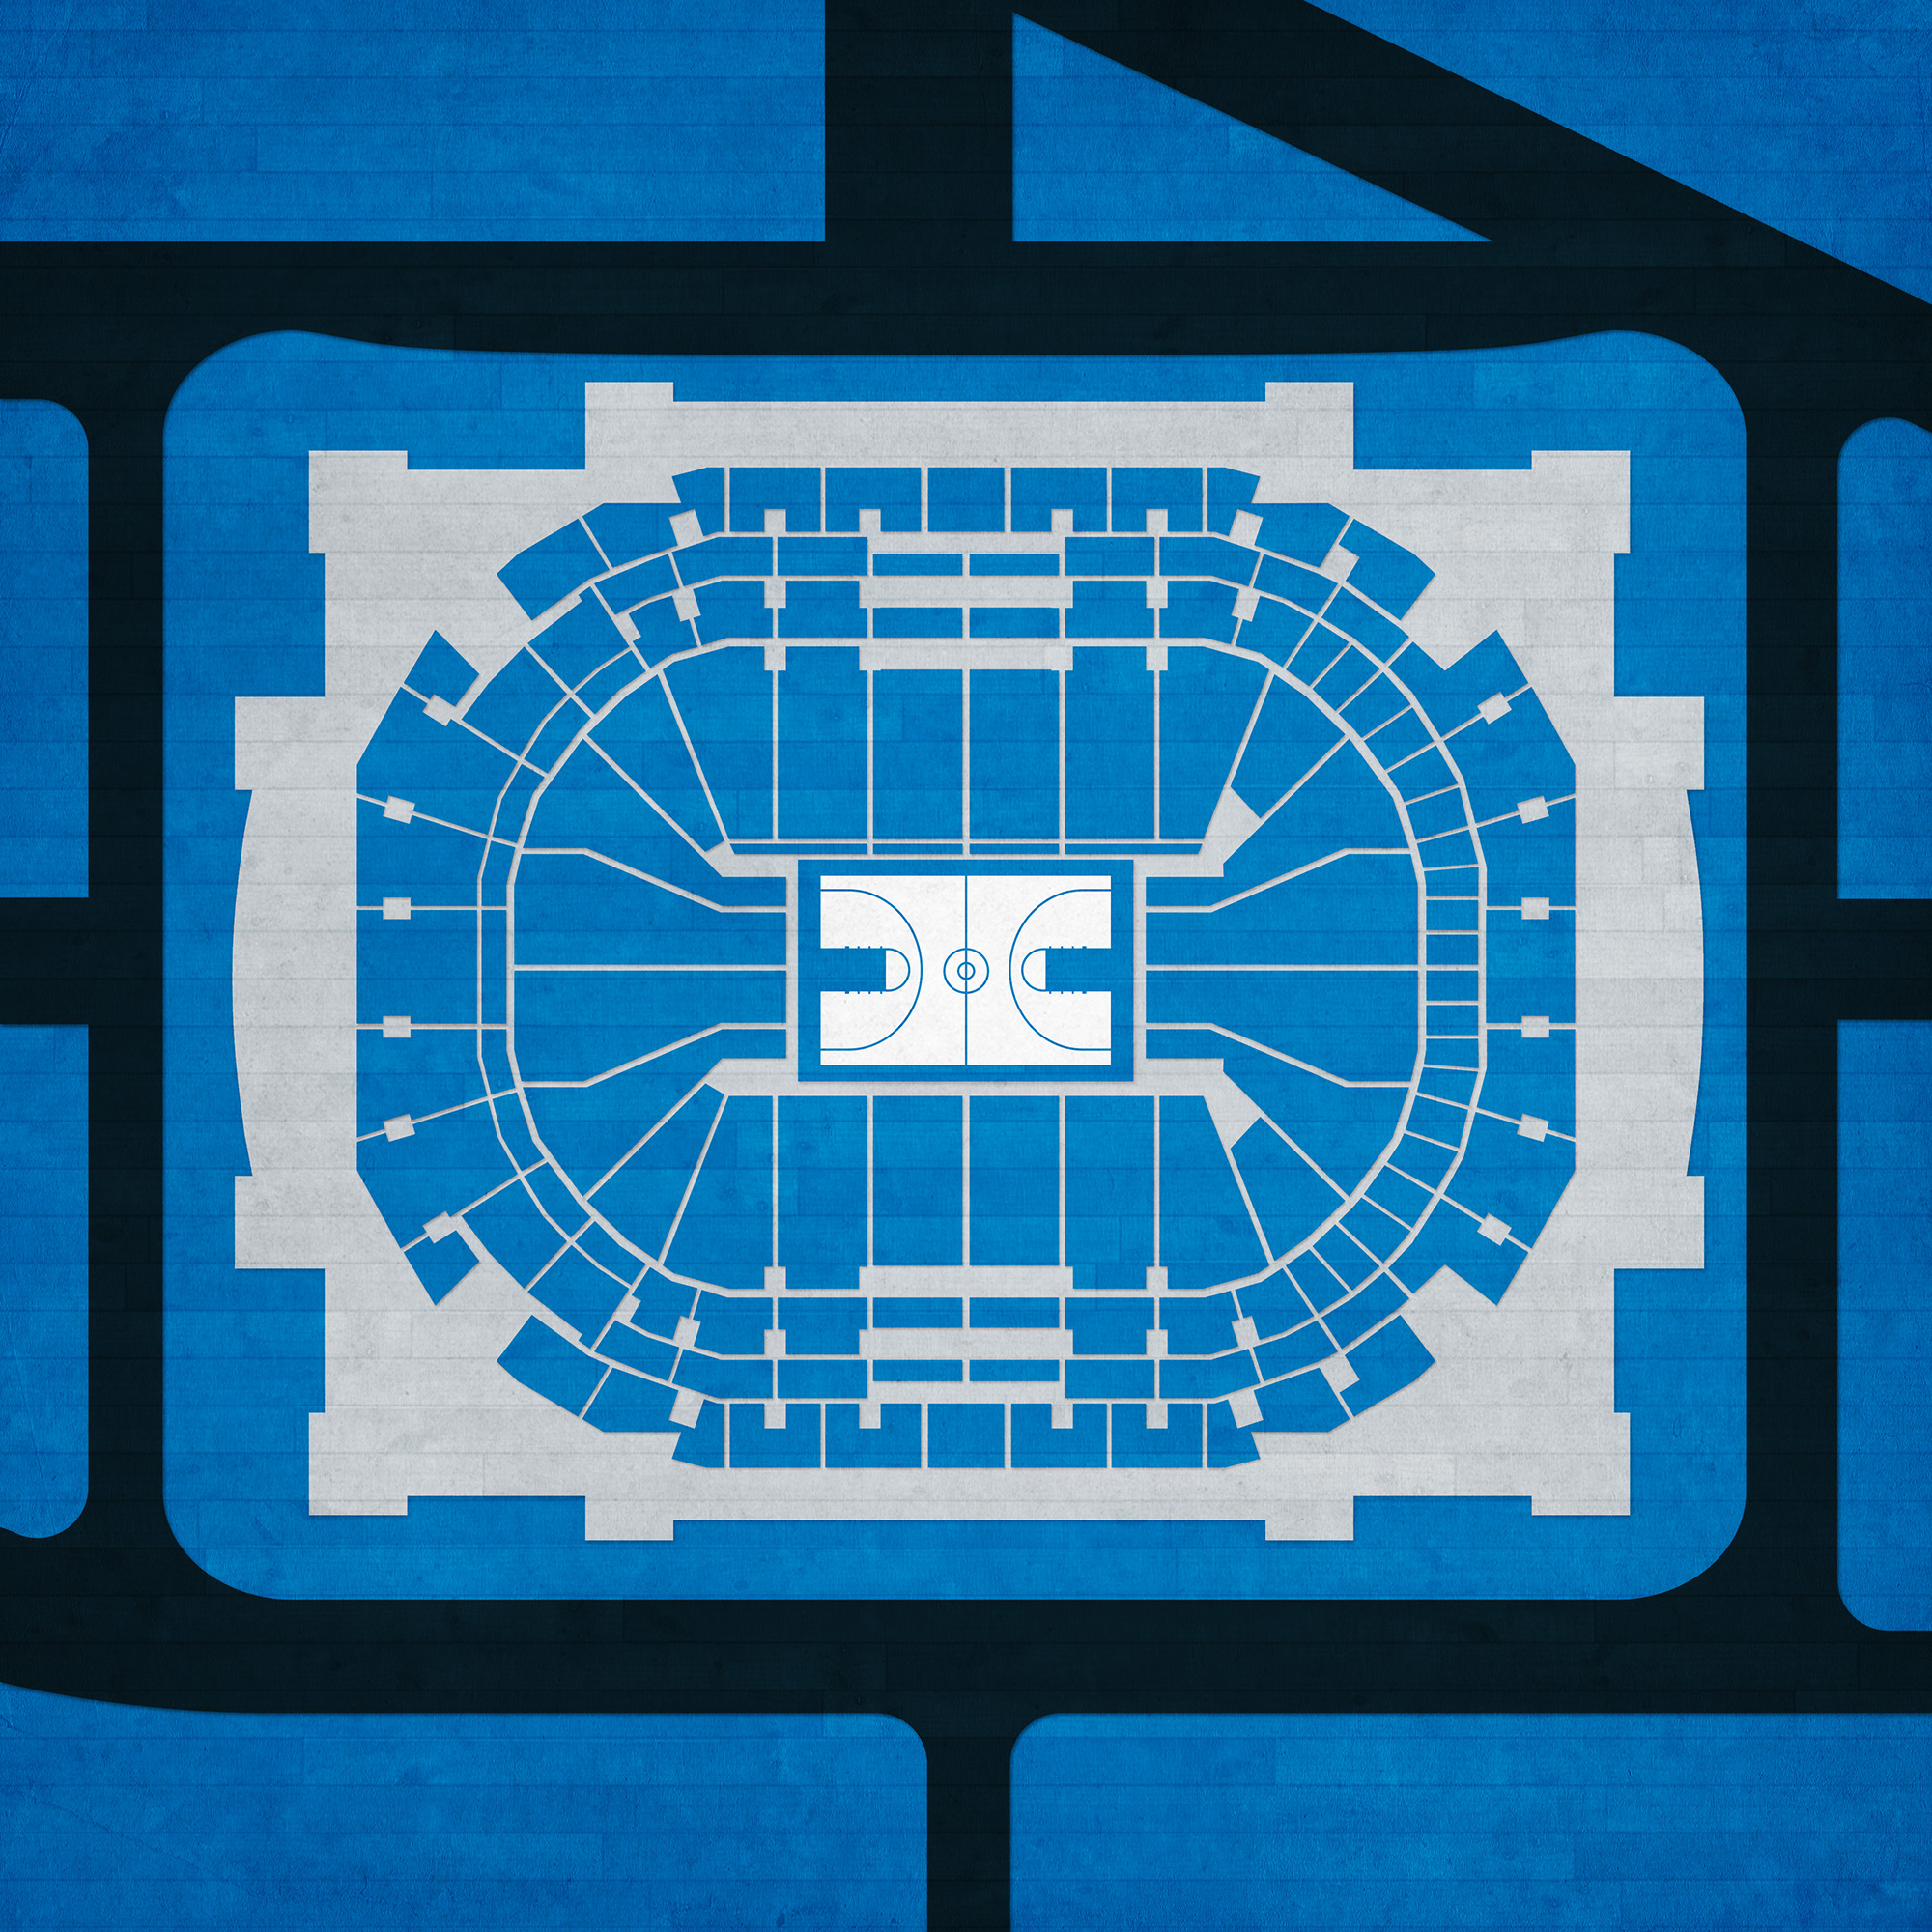 Breakdown Of The American Airlines Arena Seating Chart